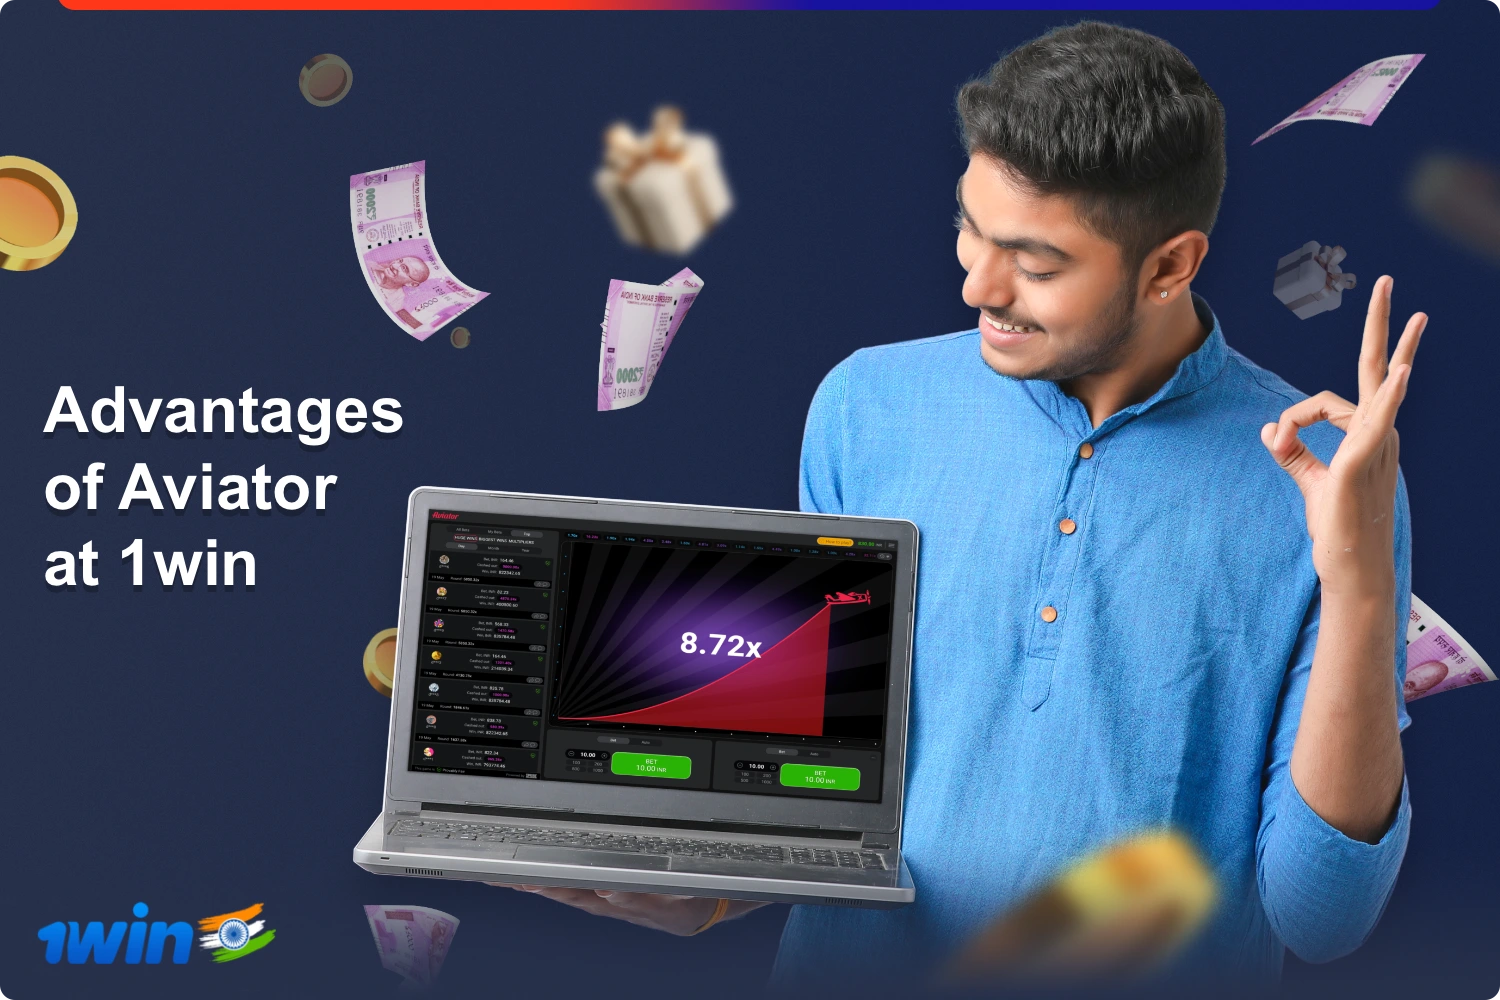 Aviator online game with instant winnings at 1win has many advantages for users from India